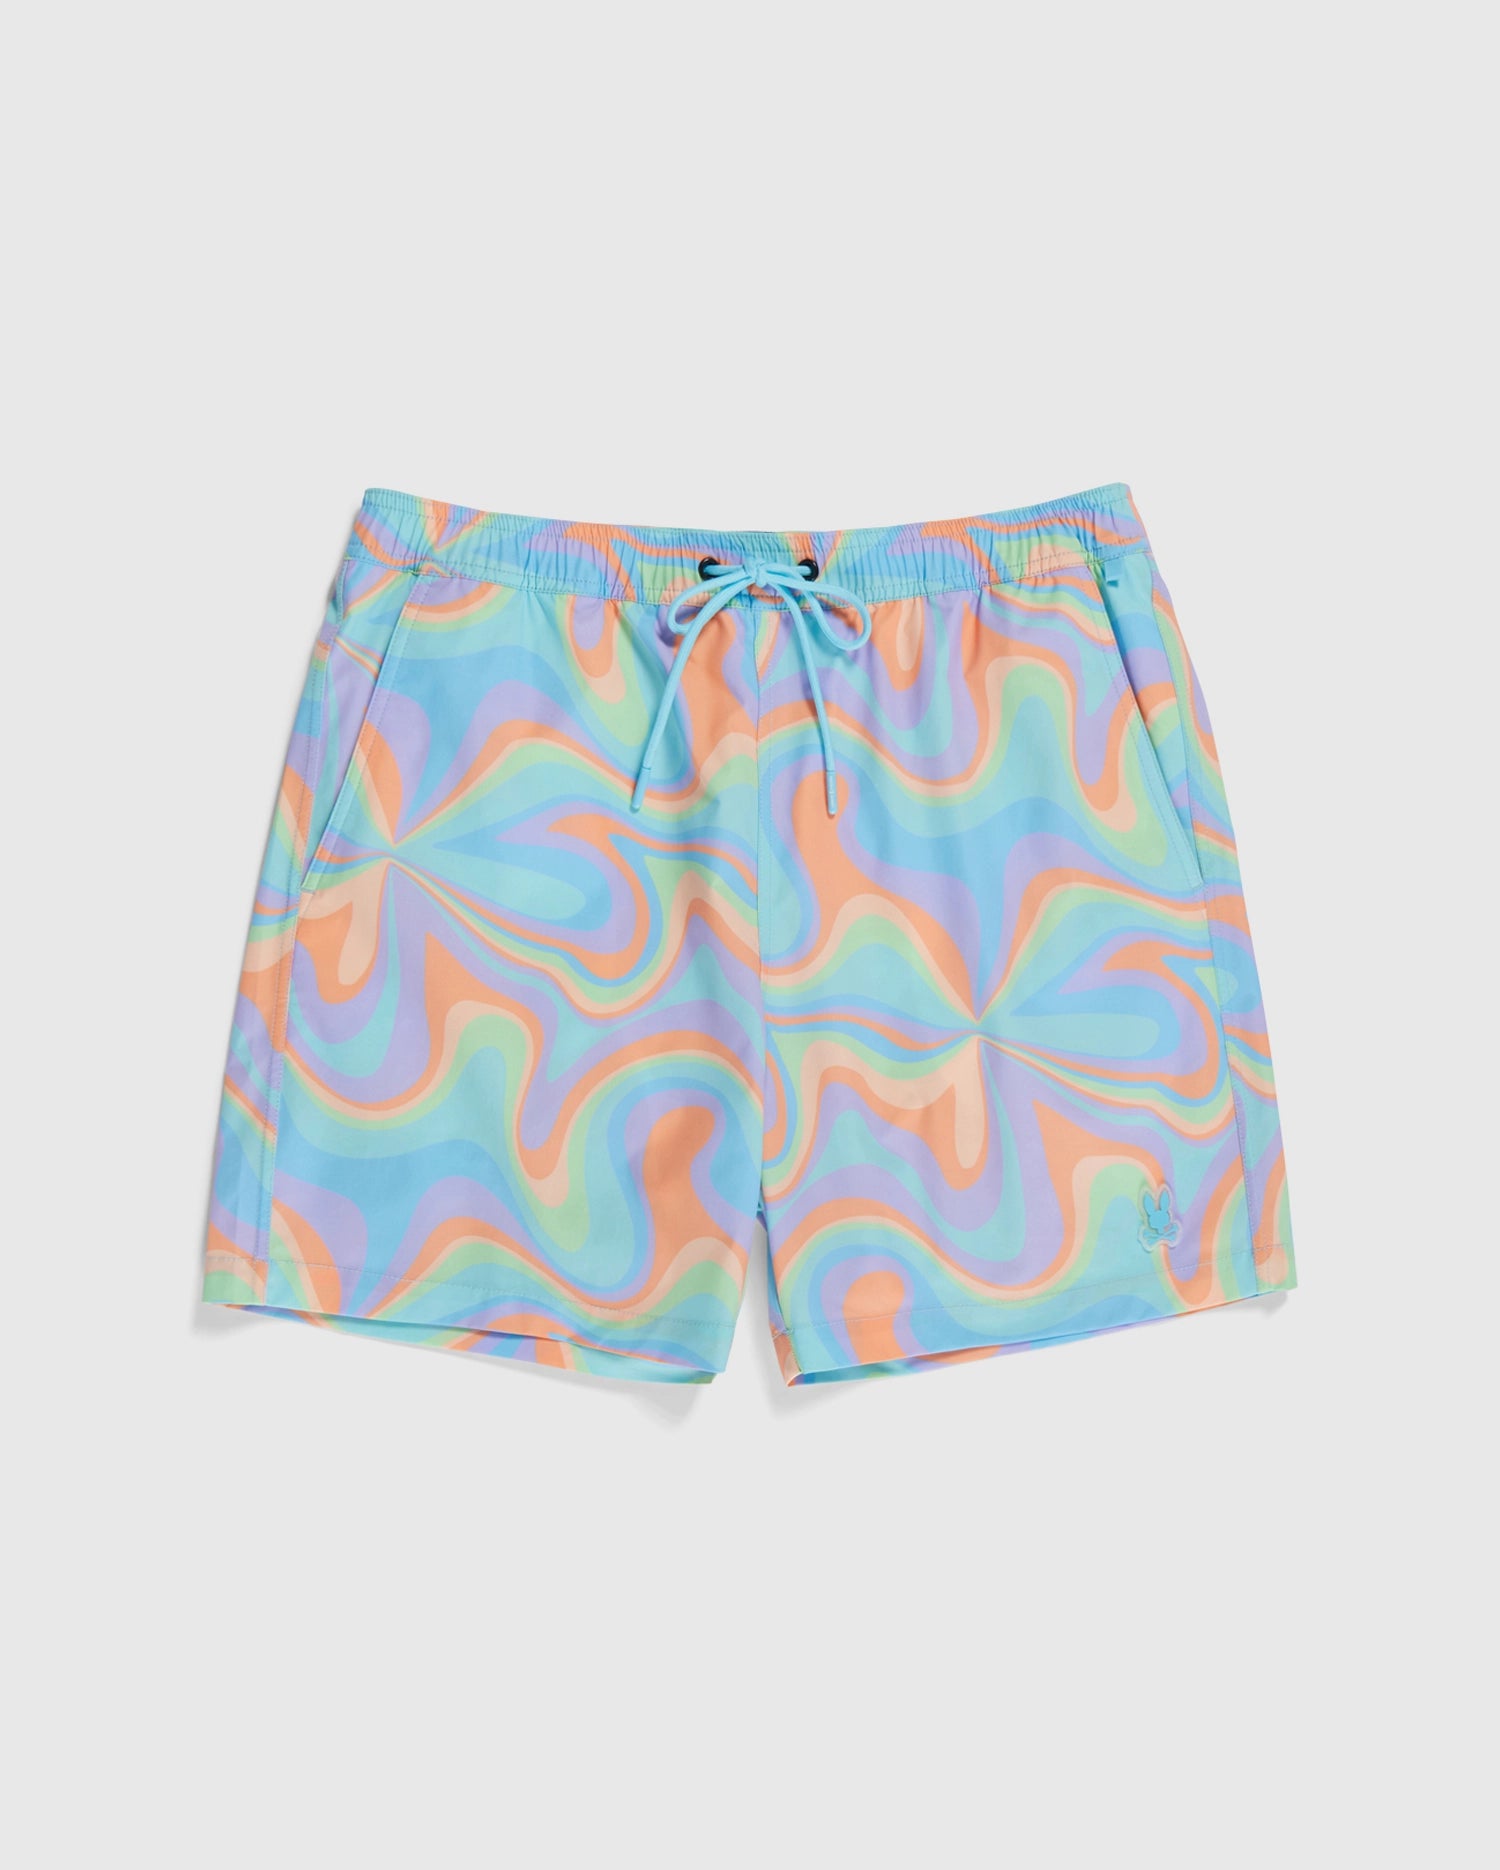 A pair of pastel-colored, quick-drying Psycho Bunny MENS BLOOMINGTON SWIM TRUNK - B6W941A2PO with a psychedelic swirl pattern displayed on a white background.